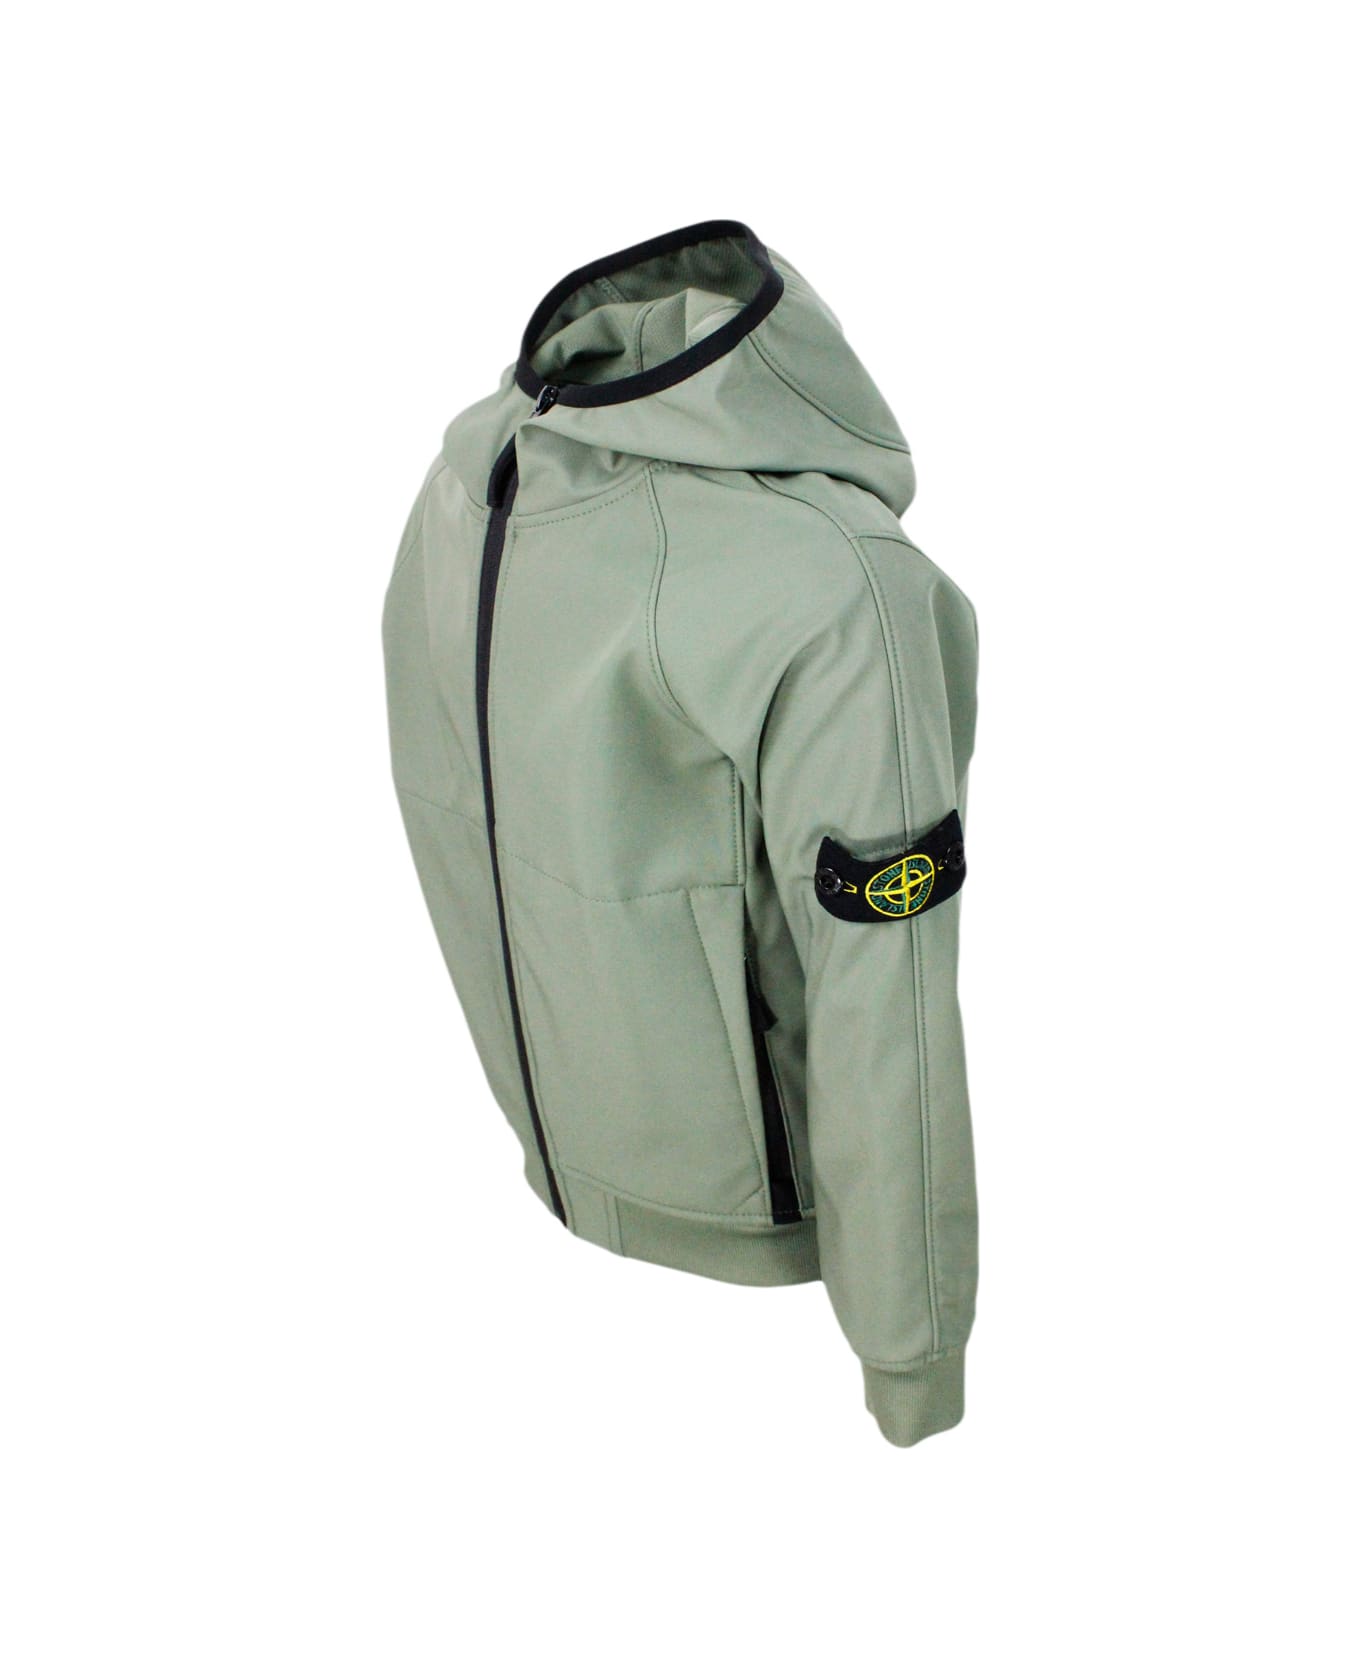 Stone Island Jacket In Water Resistant Technical Fabric With Hood And Zip Closure. Logo Applied On The Sleeve - Military